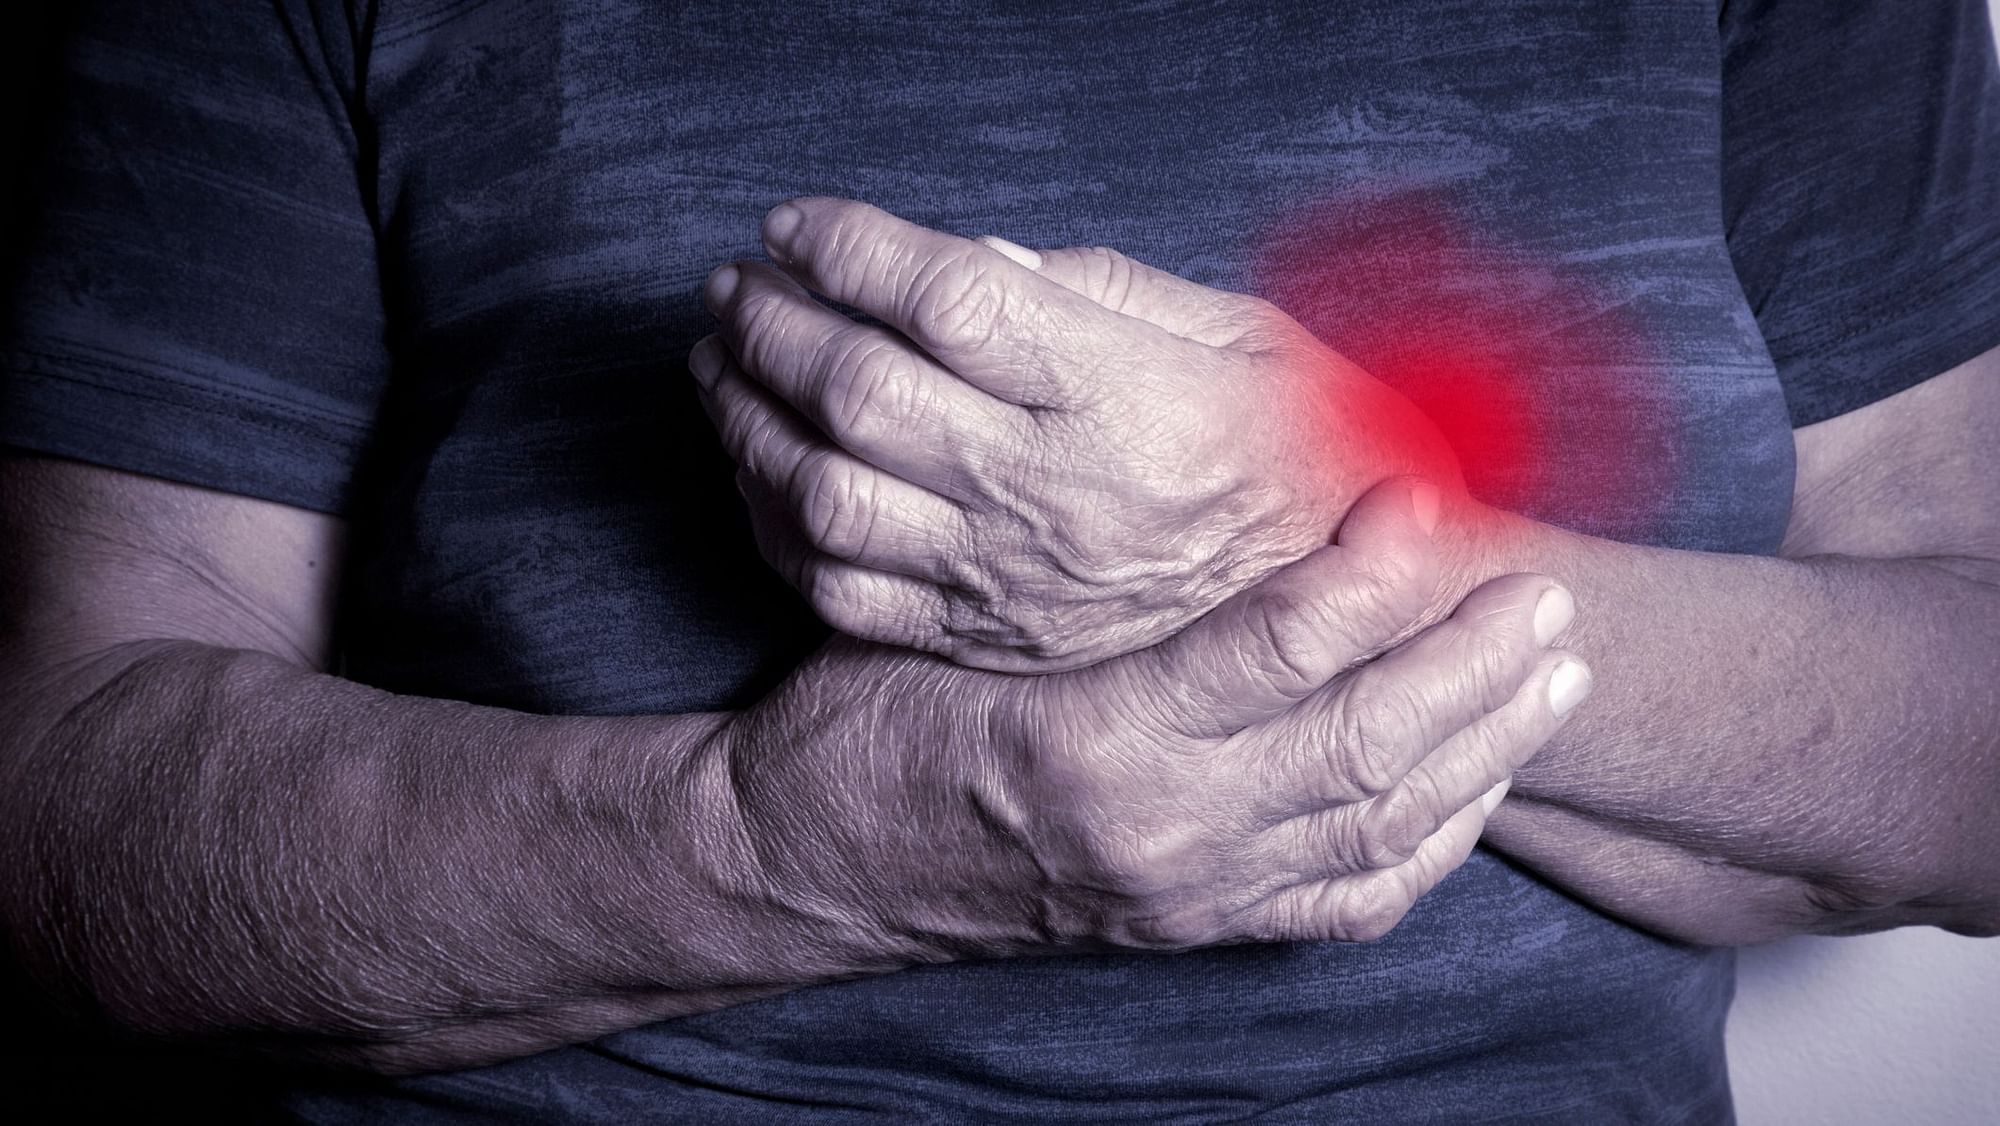 Symptoms of Rheumatoid Arthritis usually start between the ages of 40 and 60 years.